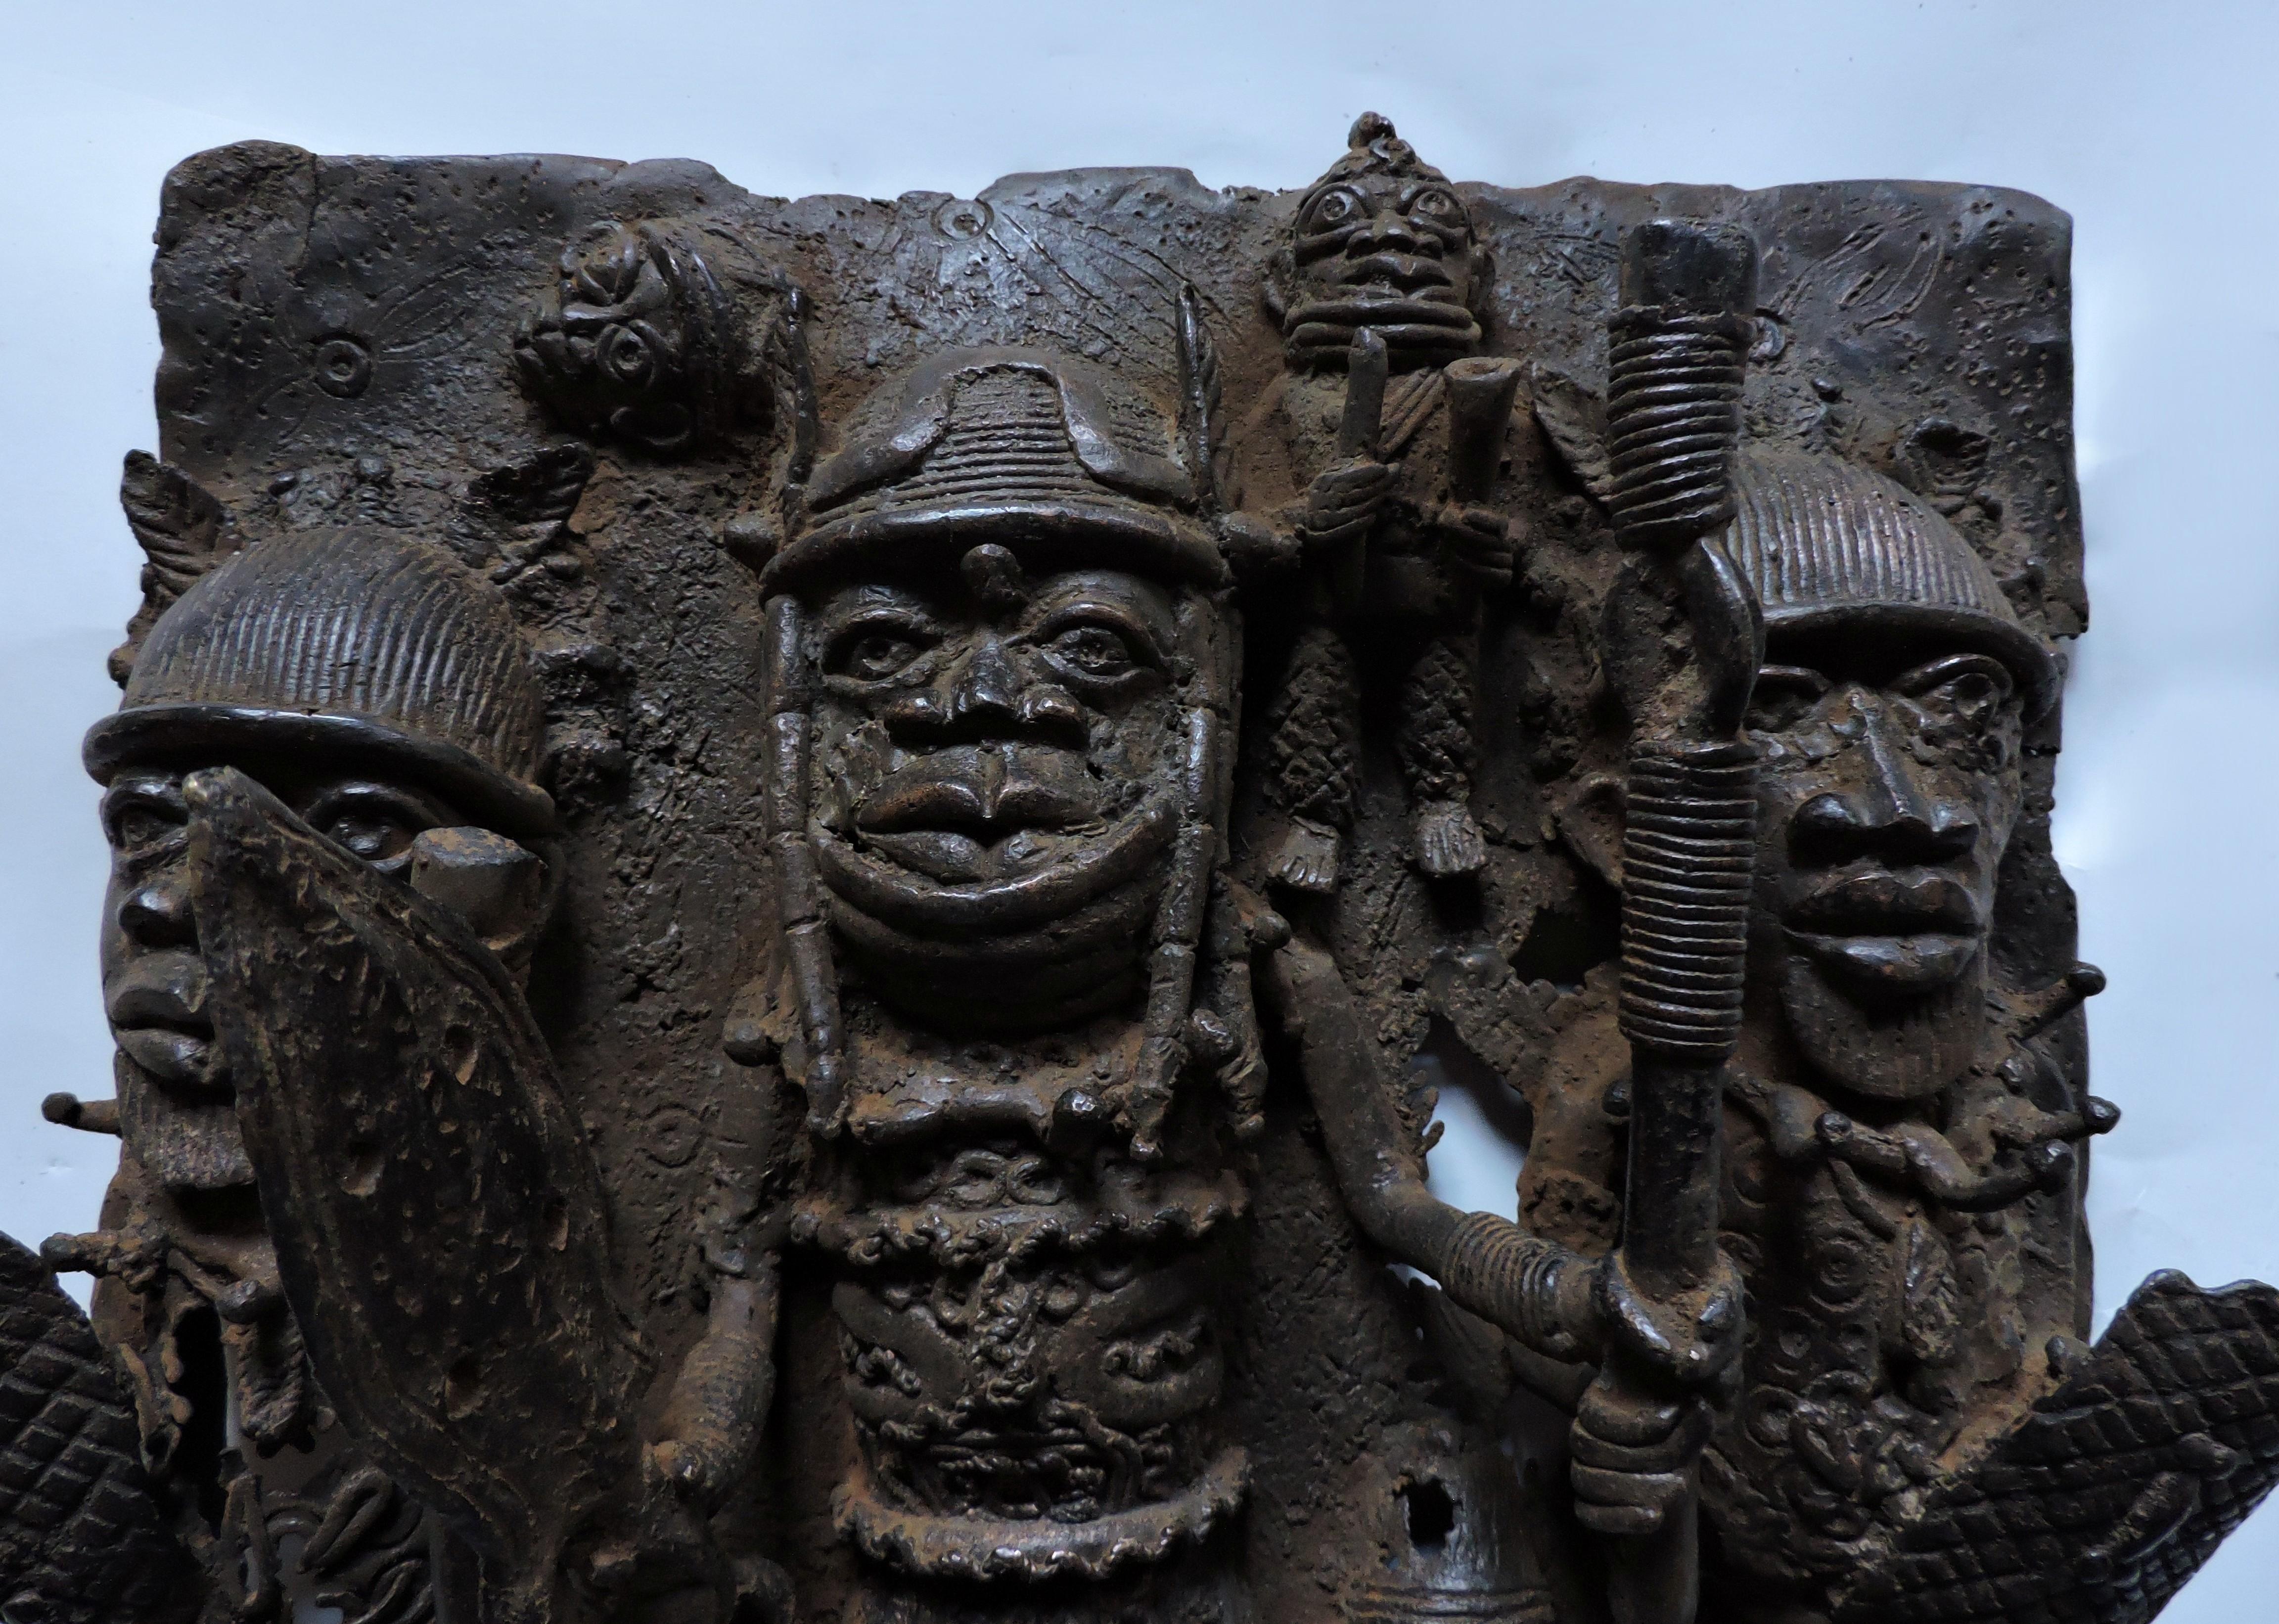 Striking and detailed bronze relief sculpture from Benin, now known as Nigeria, in Africa. This piece was modeled after ancient Benin bronzes, but is from the 20th Century. The intricate imagery was sculpted in high relief by hand and then cast in